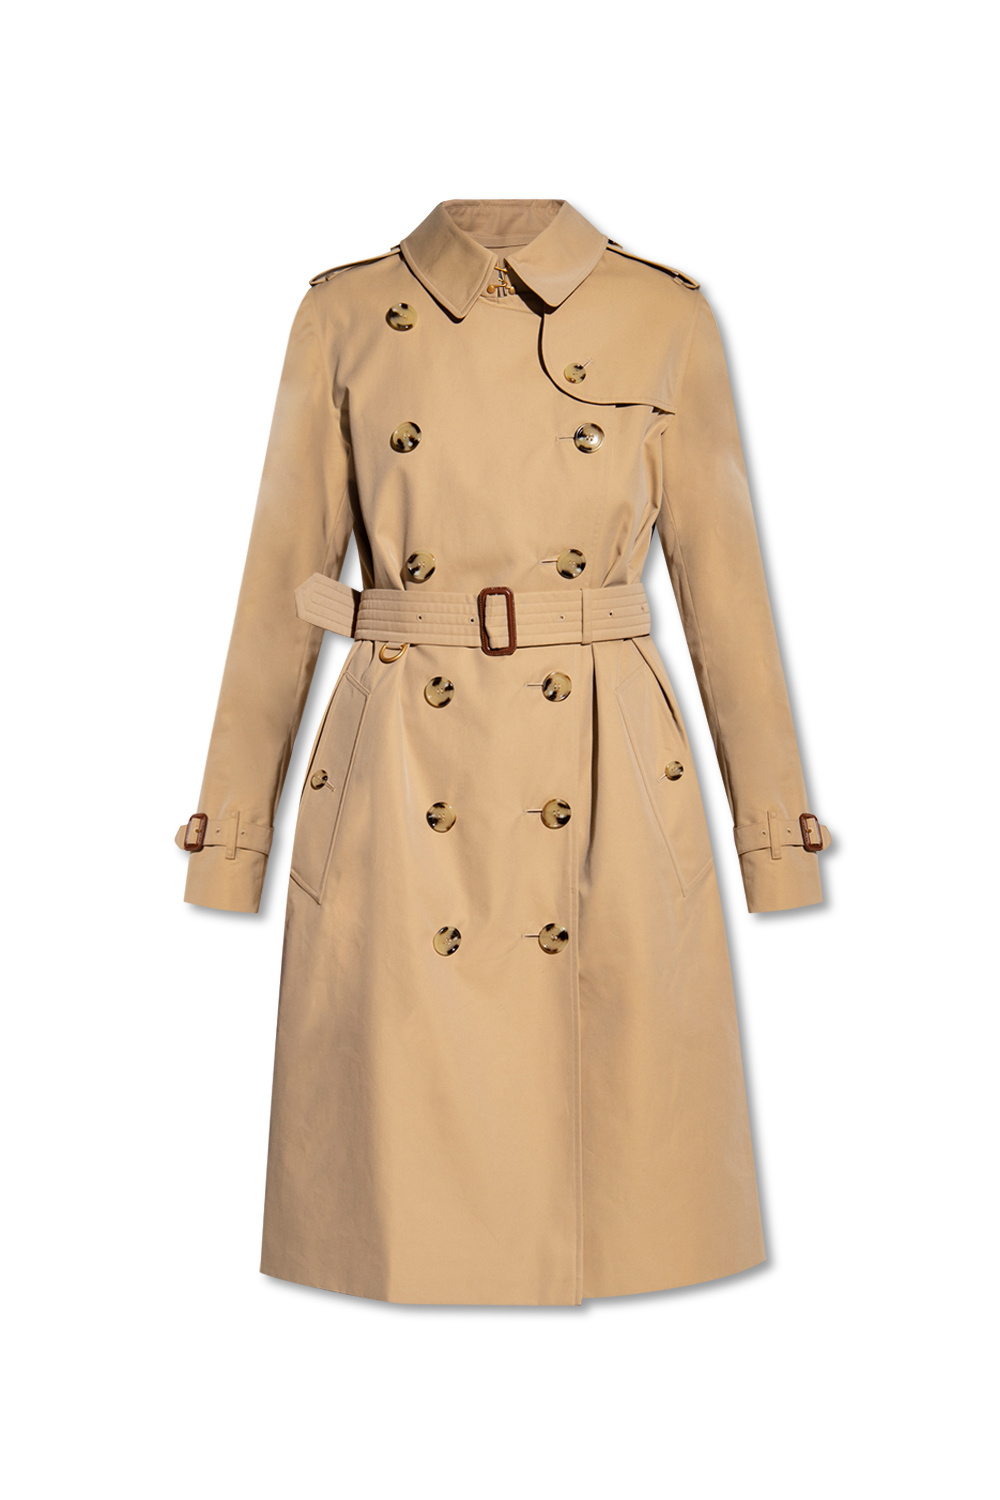 Burberry Cotton trench coat | Women's Clothing | IetpShops | Bad Bunny  Balls Out In Burberry Trench Dress & Retro-Inspired Shoes at 2022